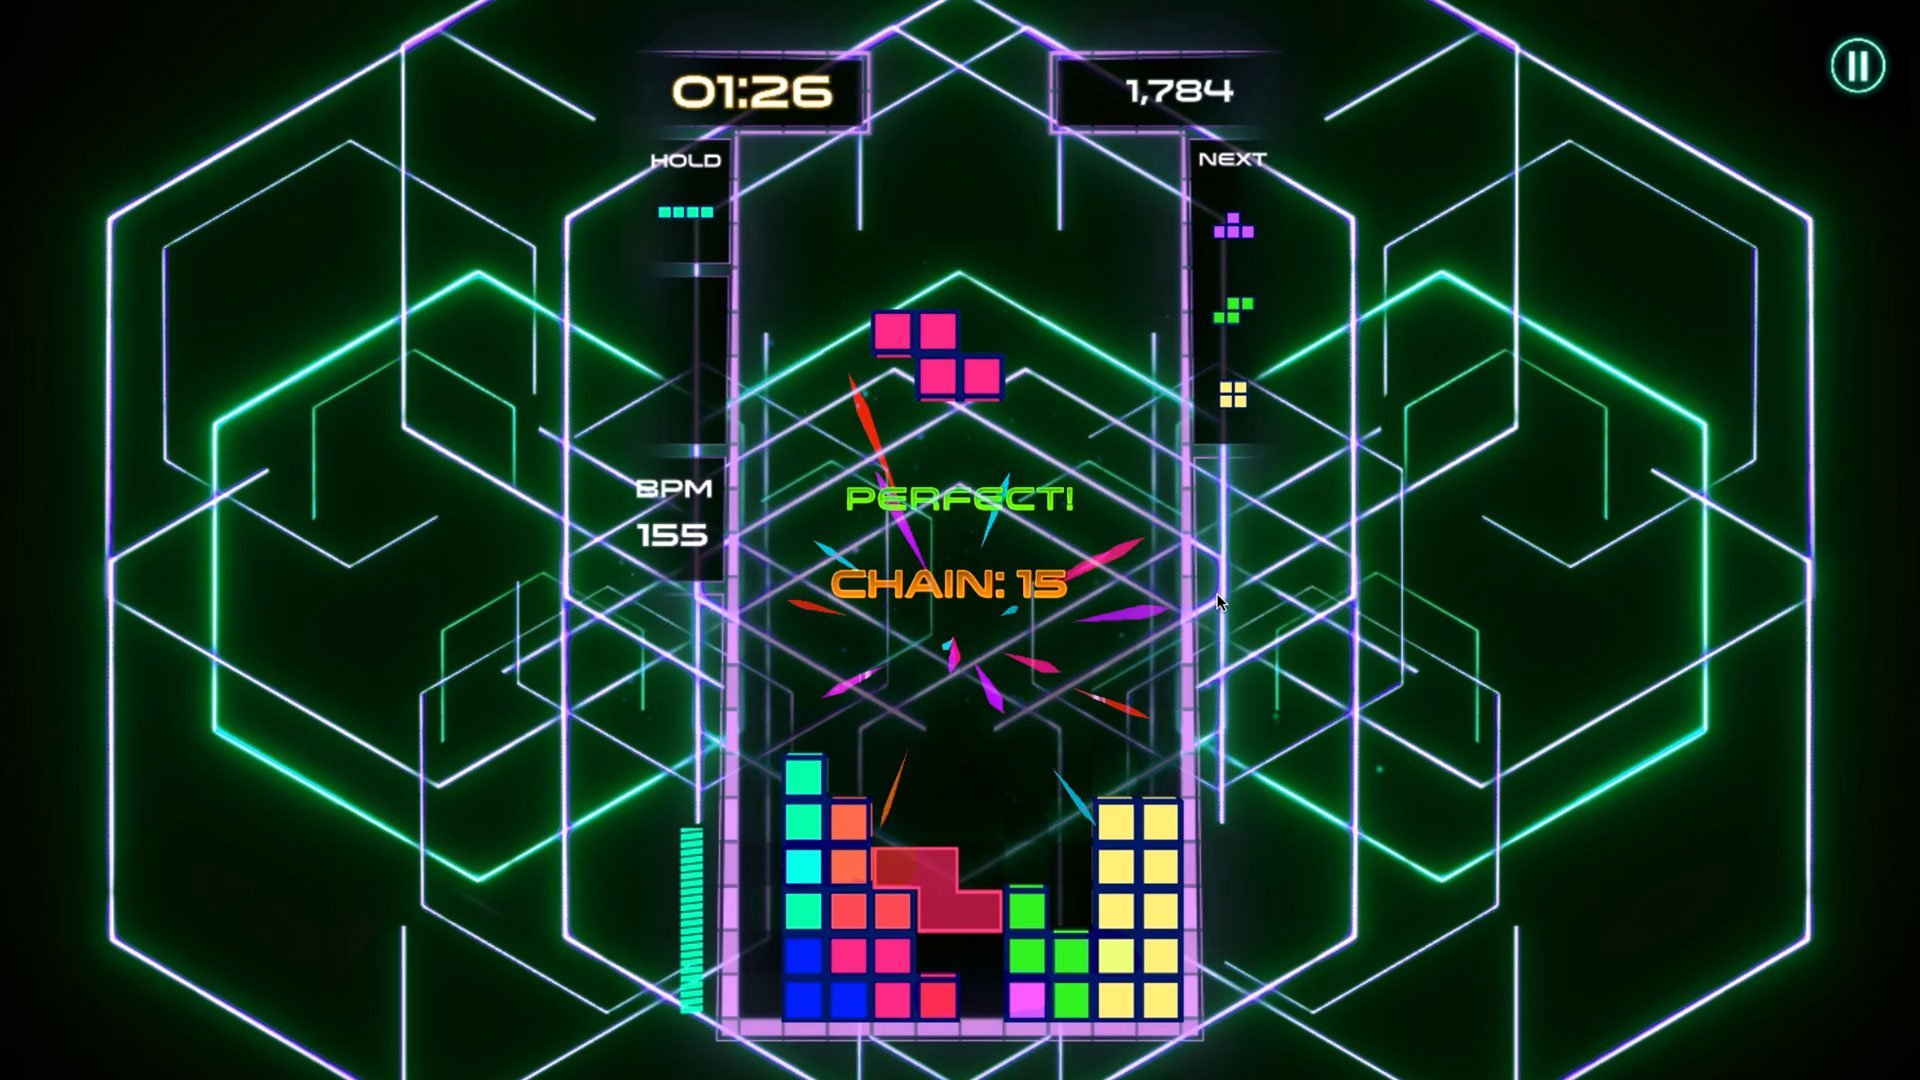 Tetris Beat launches on Apple Arcade with exclusive songs by trending artists!